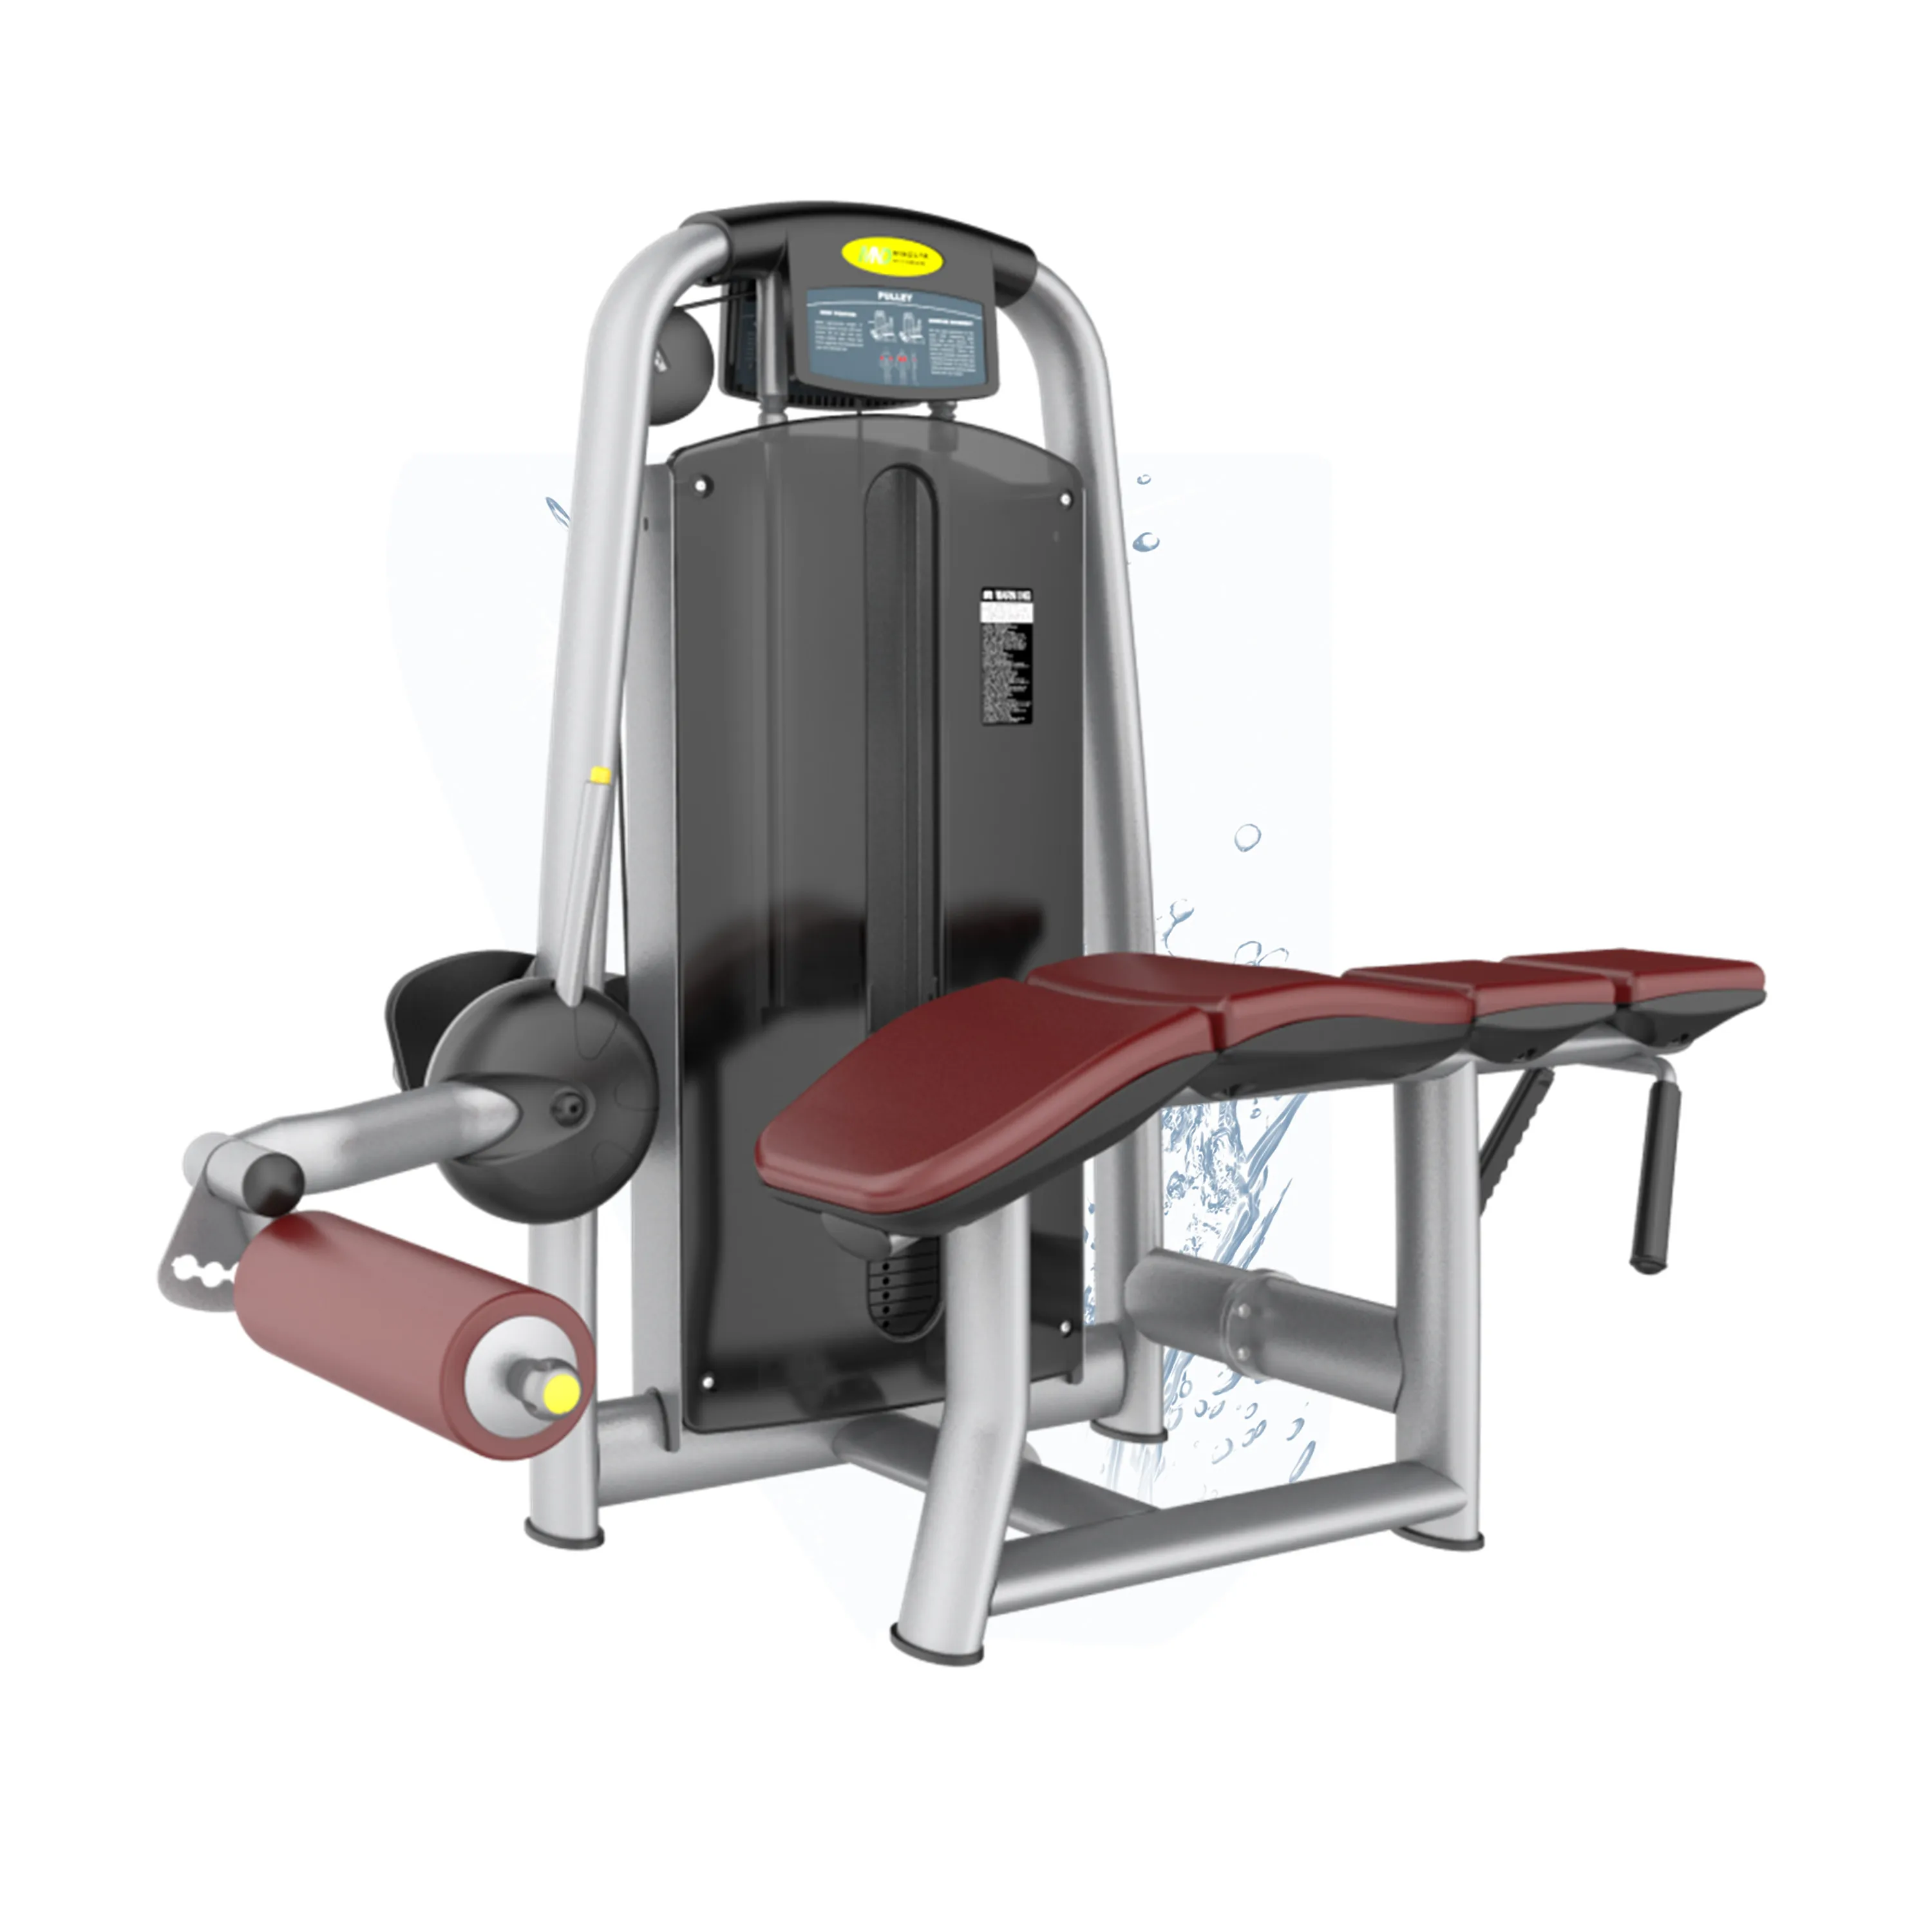 

OEM Service Prone Leg Curl Taining Machine Fitness Equipment Manufacturer Sport Exercise Equipment For Gym Workout, Customized color